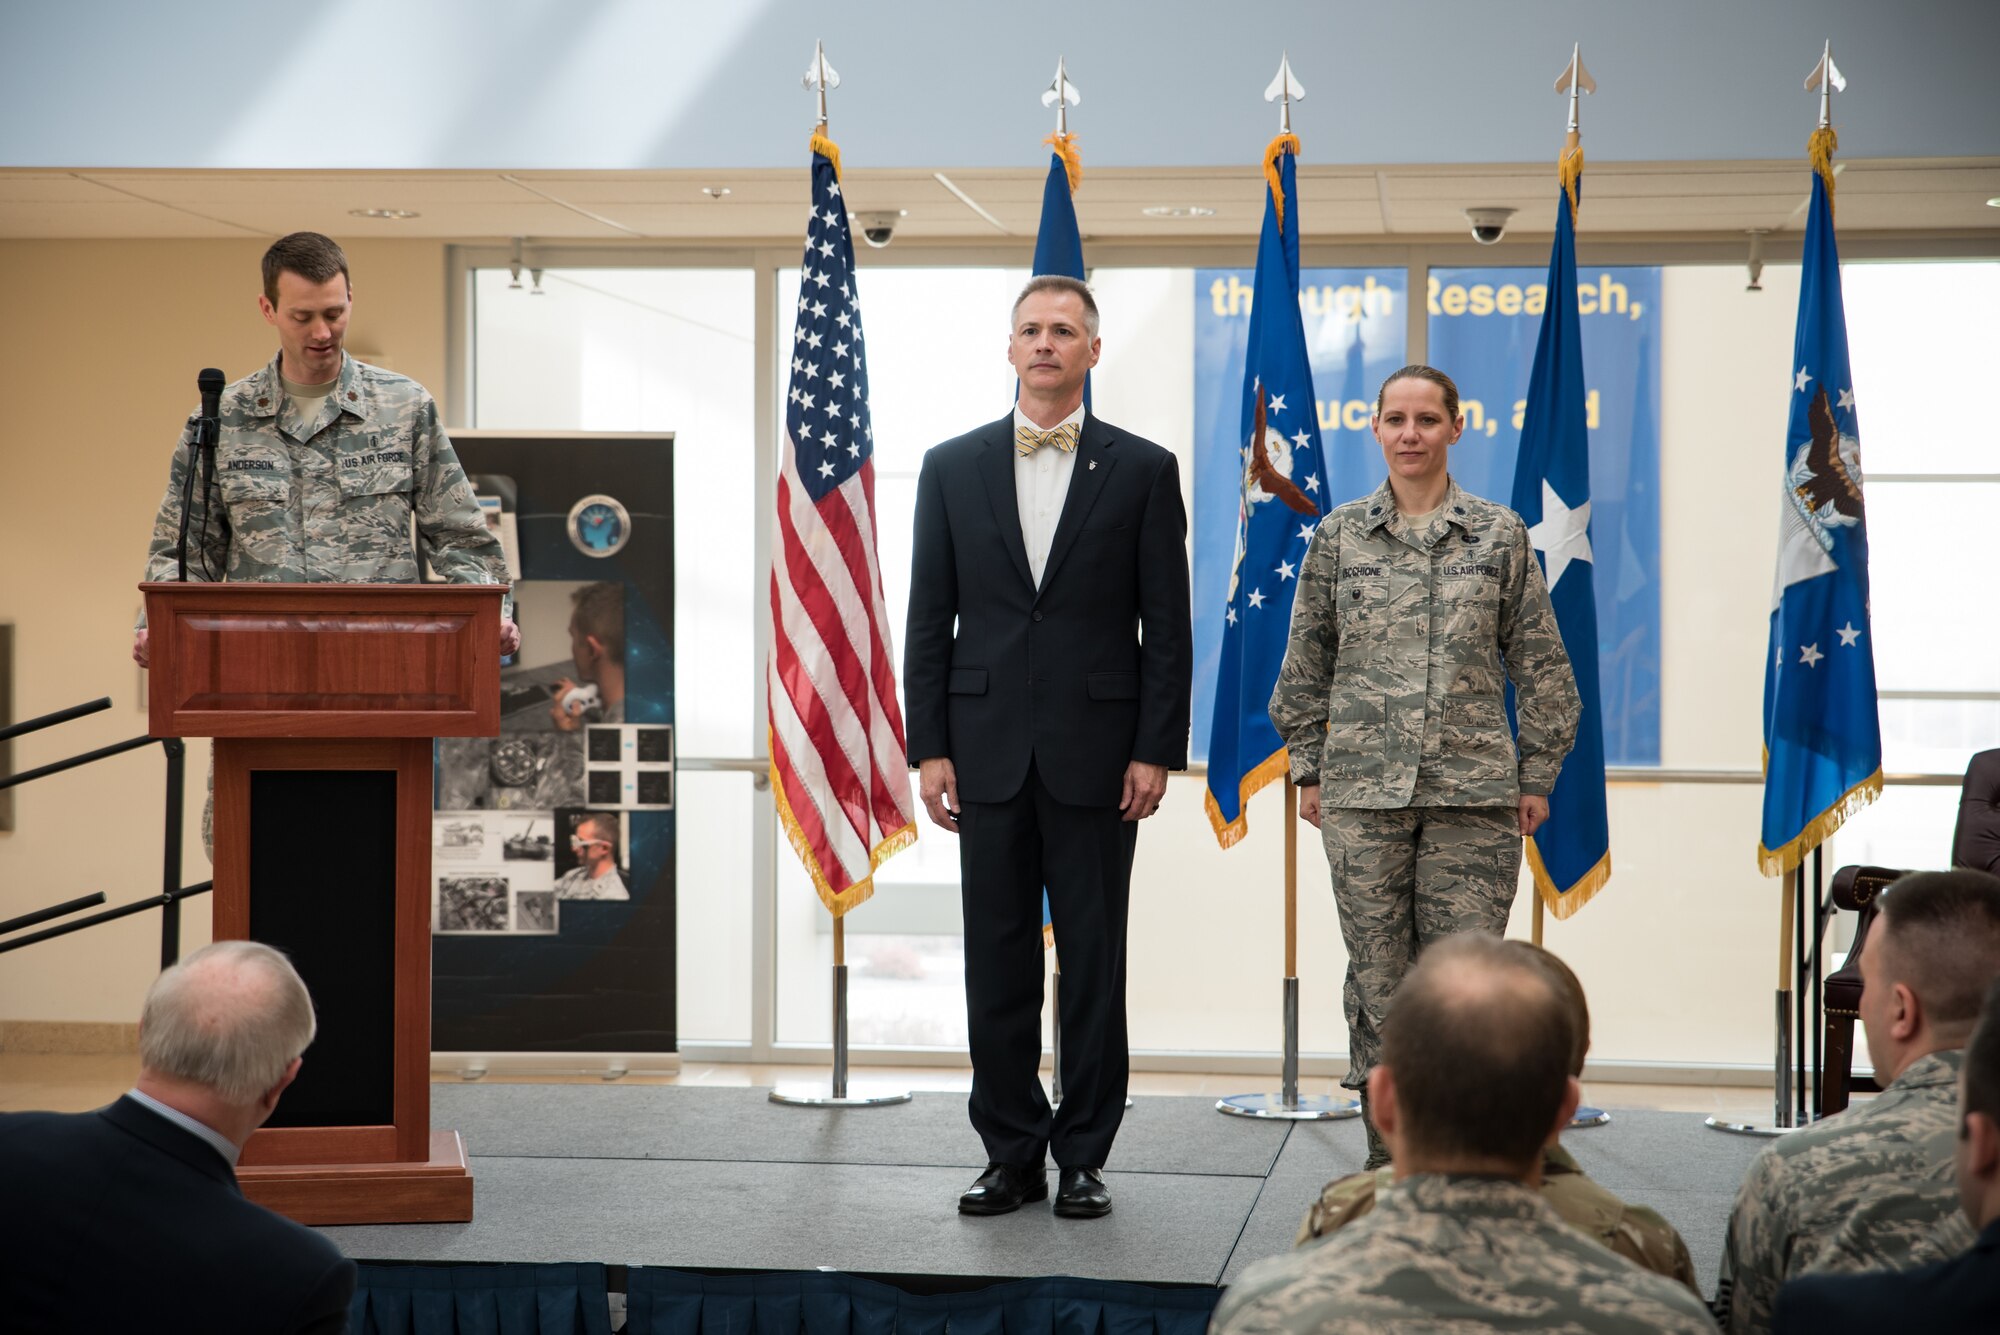 Dr. Kevin Geiss, director of the 711th Human Performance Wing's Airman Systems Directorate, and Lt. Col. Jennifer Vecchione, chief of the newly established Warfighter Medical Optimization Division stand during the reading of the charter activation document at a ceremonial ribbon cutting ceremony in honor of the activation of the Warfighter Medical Optimization Division, one of five divisions comprising the Airman Syustems Directorate. The activation ceremony was held May 1 at the United States Air Force School of Aerospace Medicine. (U.S. Air Force photo/Rick Eldridge)